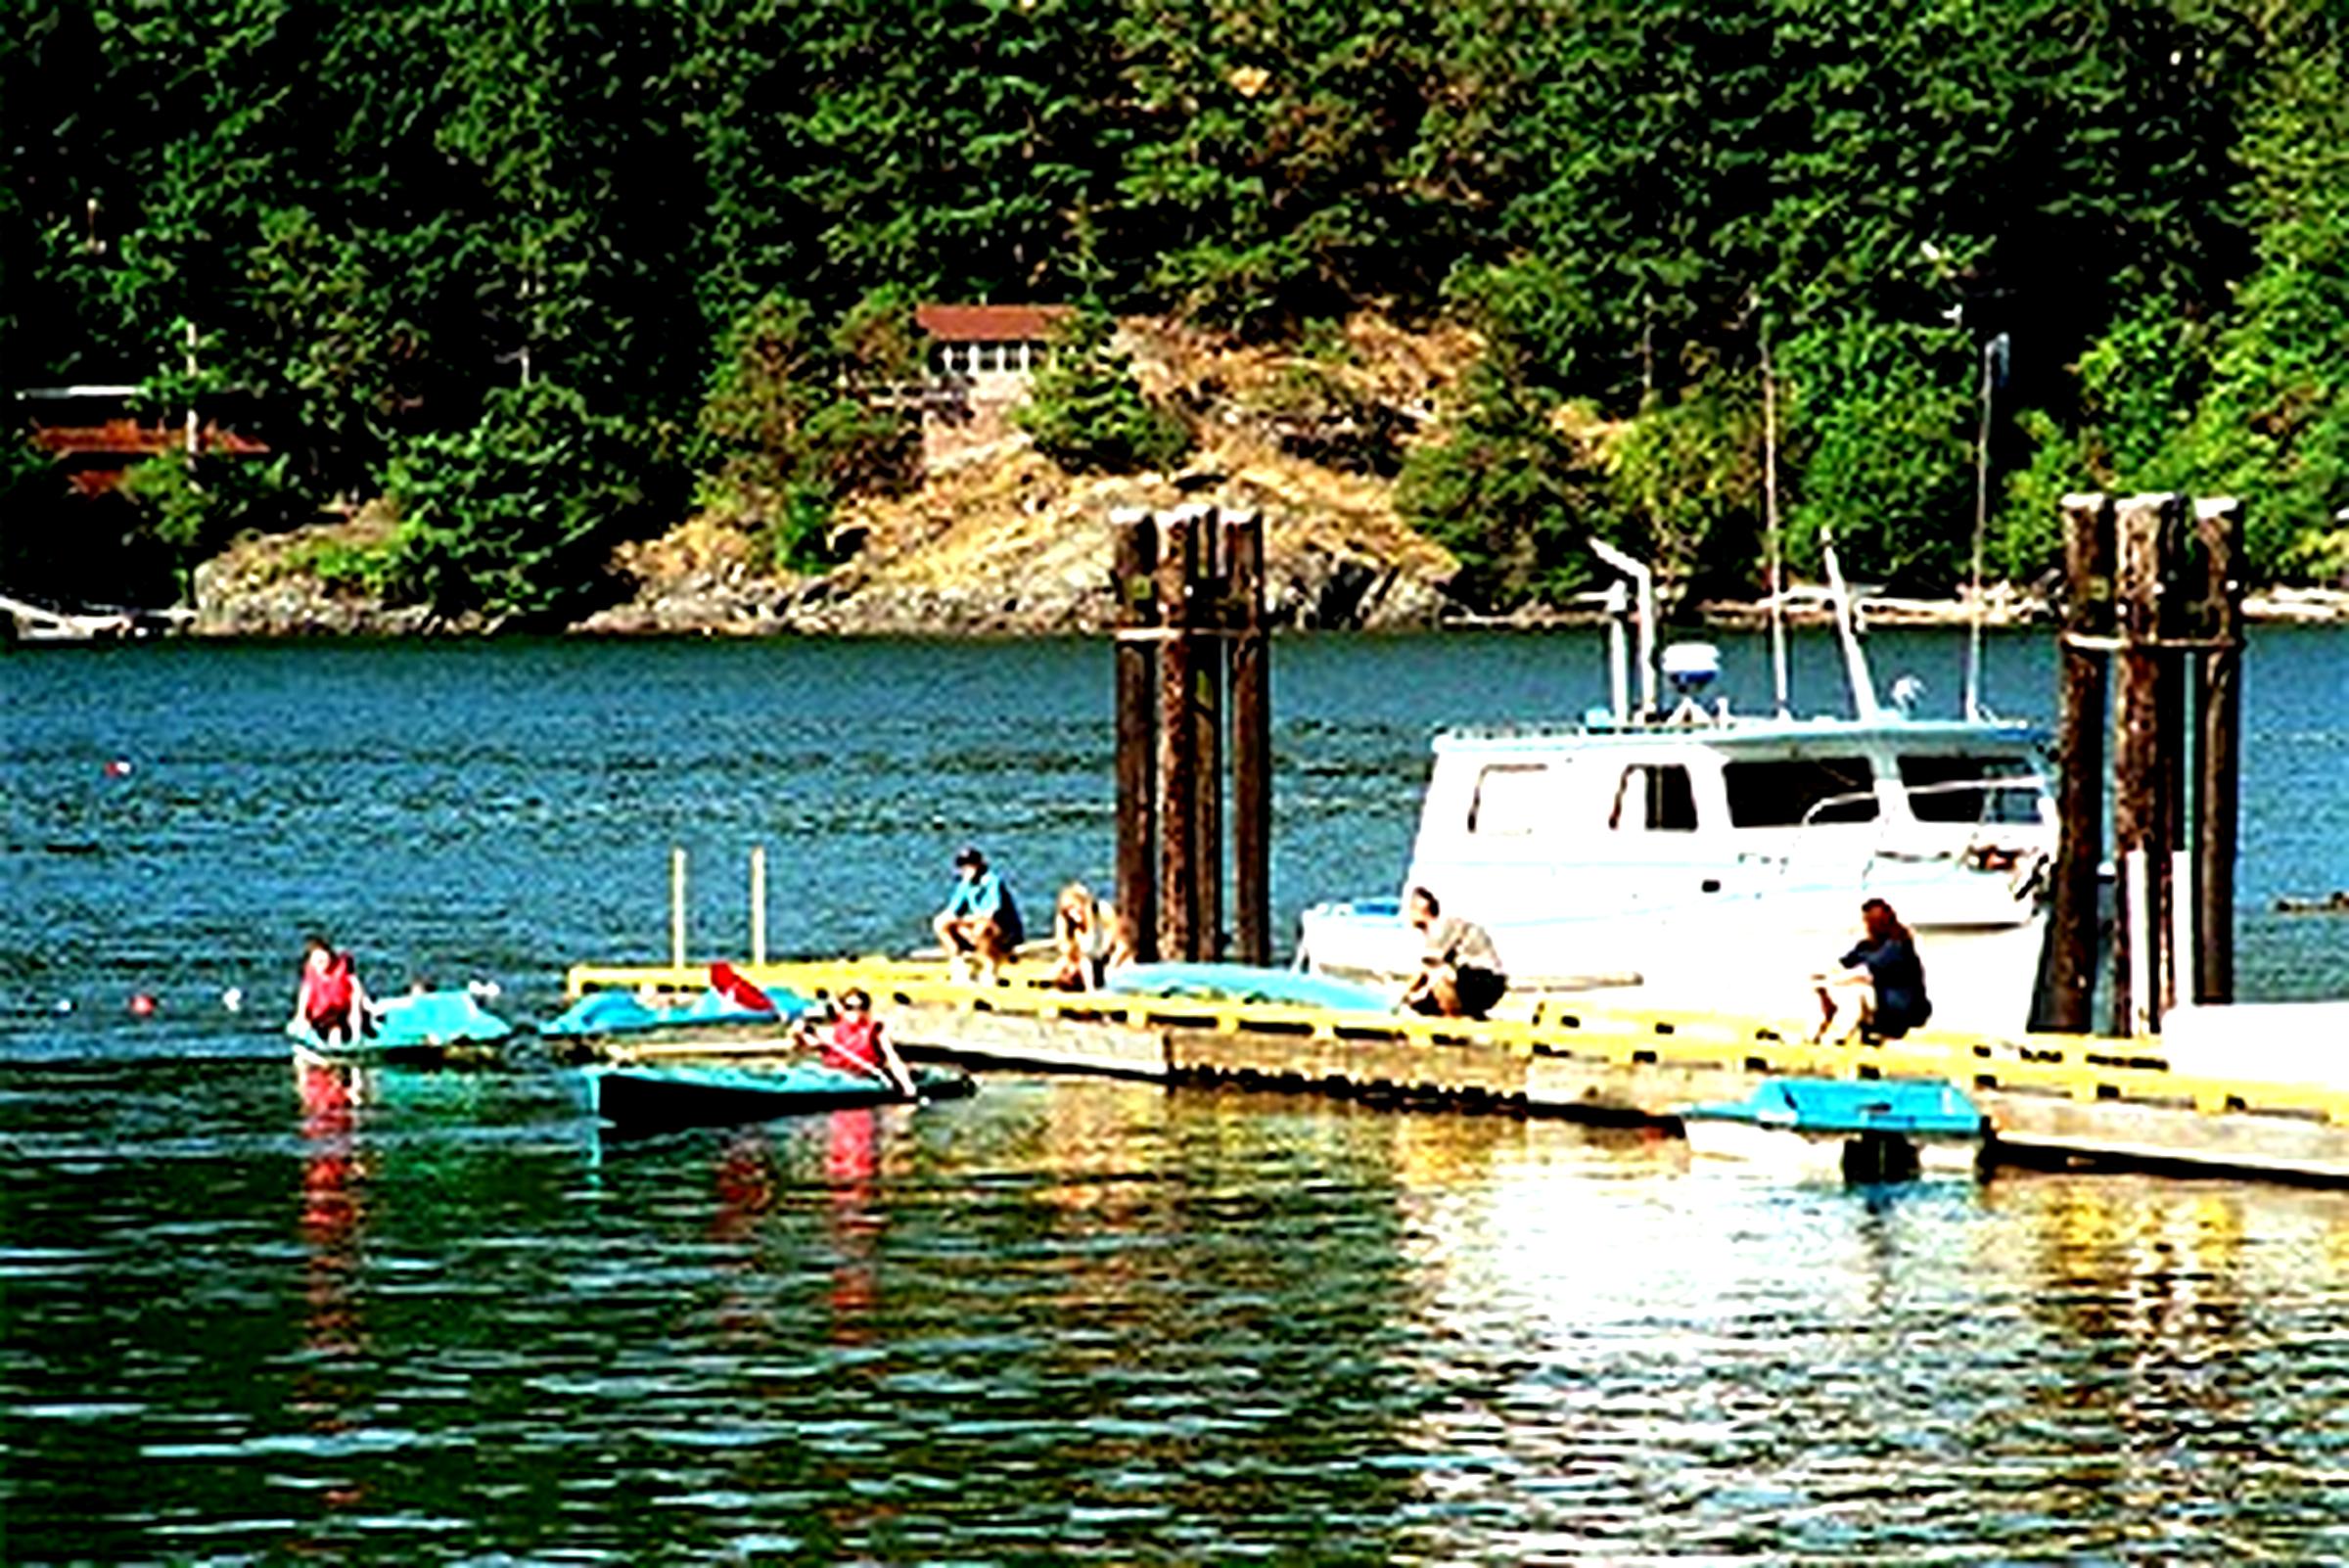 A serene bayside scene on a clear summer day, featuring a dock with several people engaged in leisure activities. Some are sitting on the dock while others paddle small boats. A larger boat is moored at the dock, and the backdrop is a lush, green forested hillside. The overall atmosphere is peaceful and recreational.